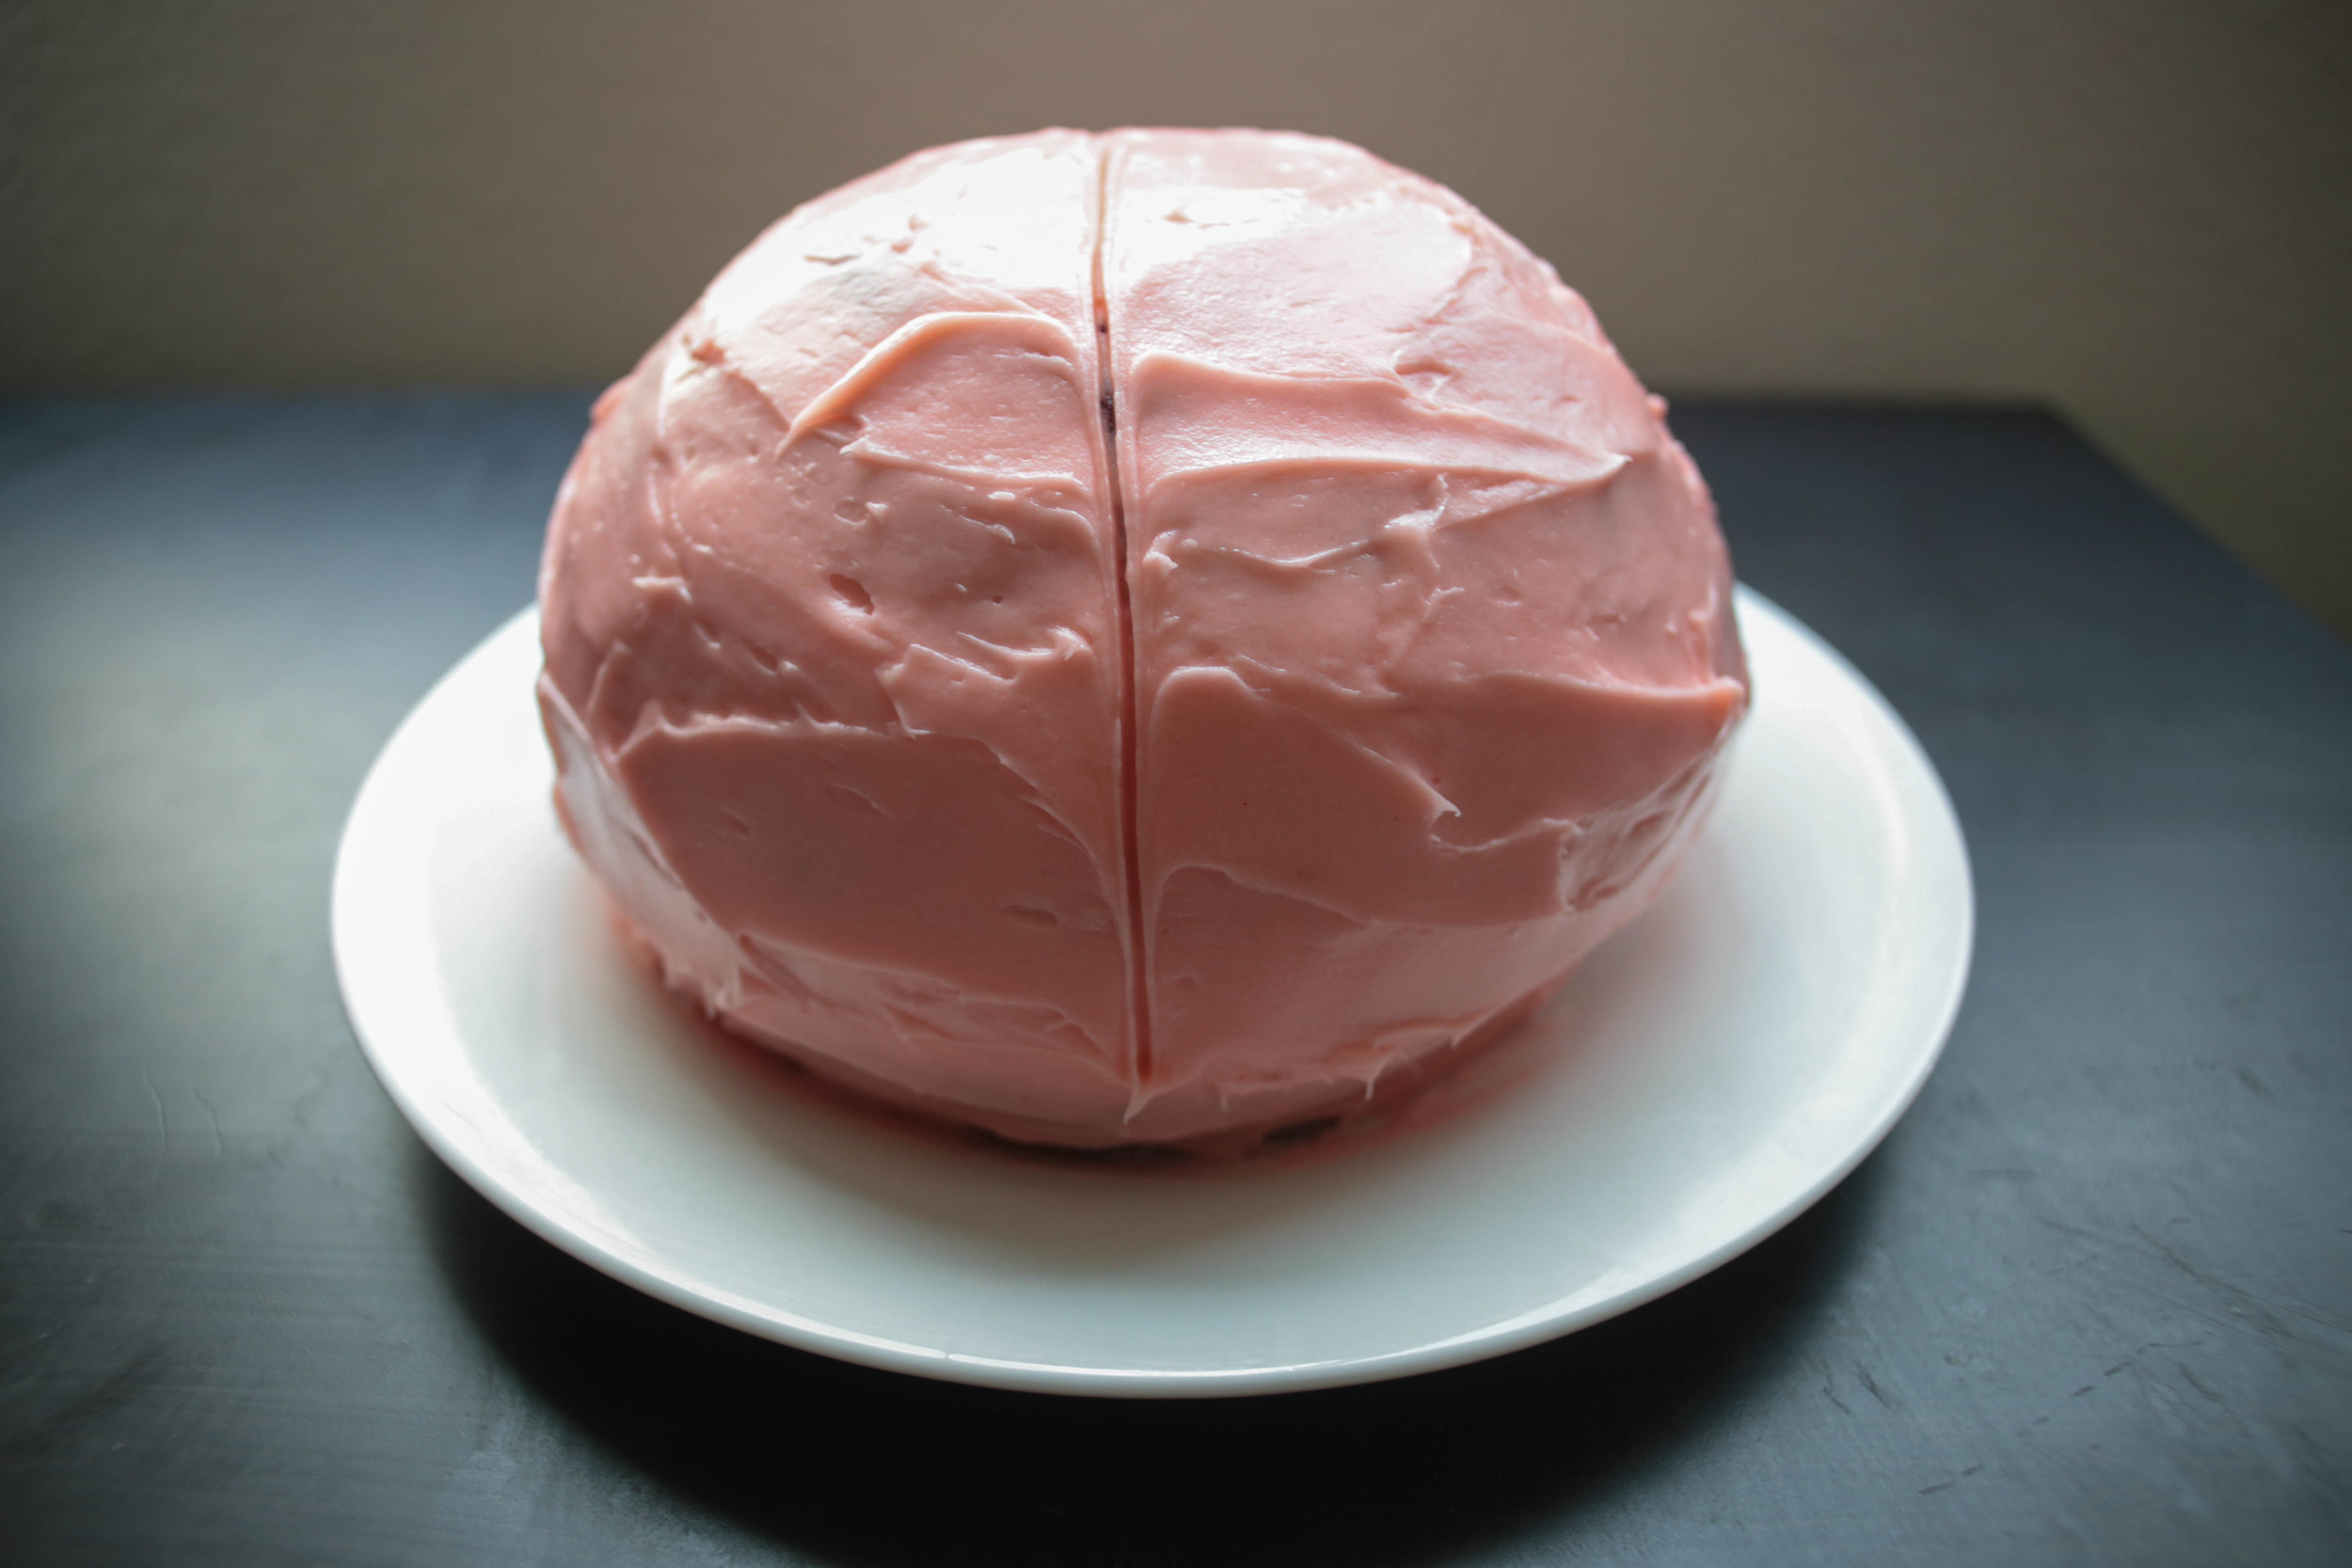  Spread on an even layer of pink cream cheese frosting. 